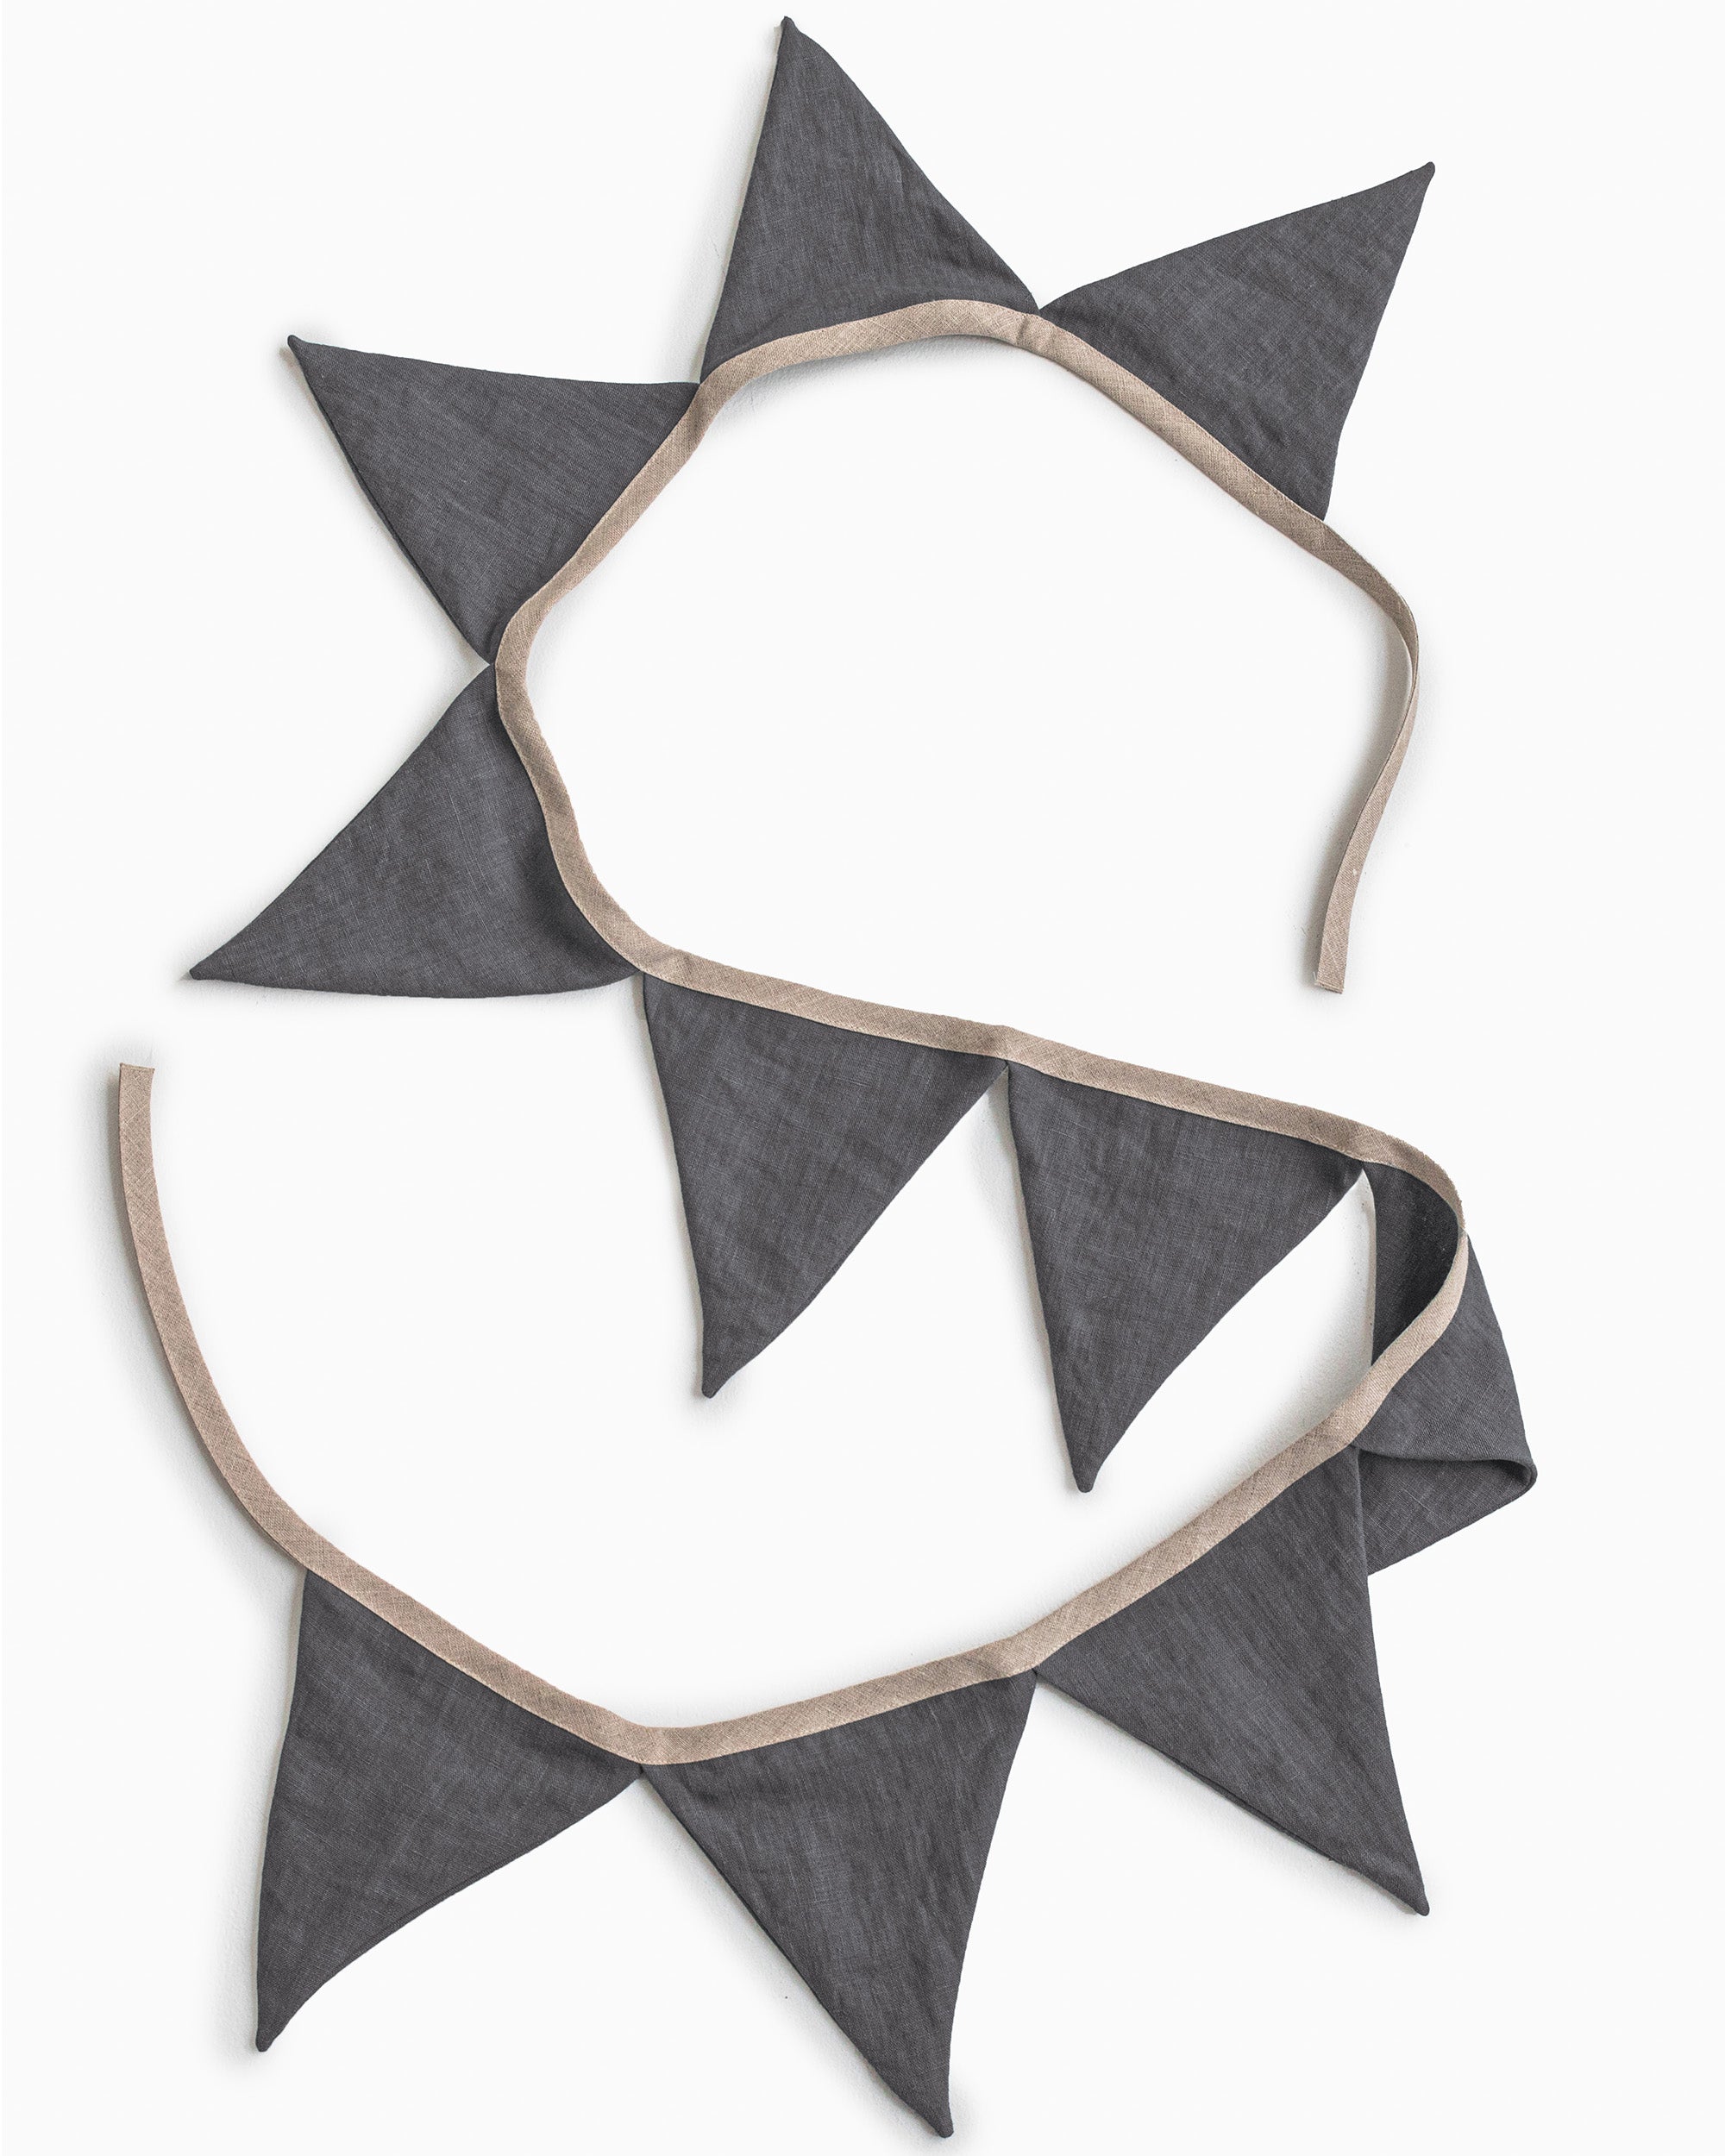 Linen Bunting in Charcoal Gray | Linen Nursery Decoration | MagicLinen